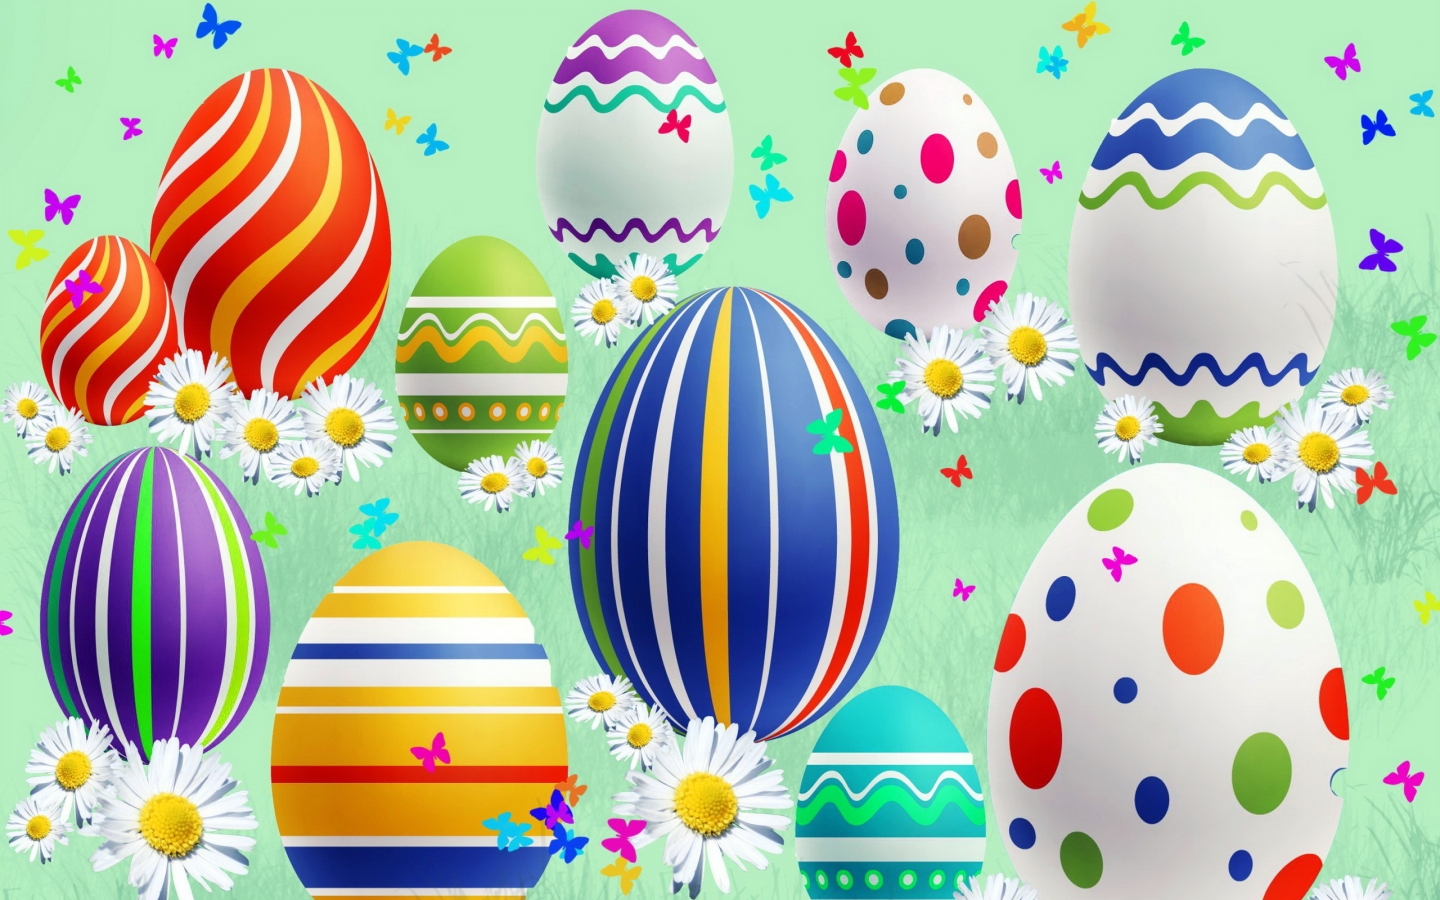 Lovely Easter Eggs for 1440 x 900 widescreen resolution